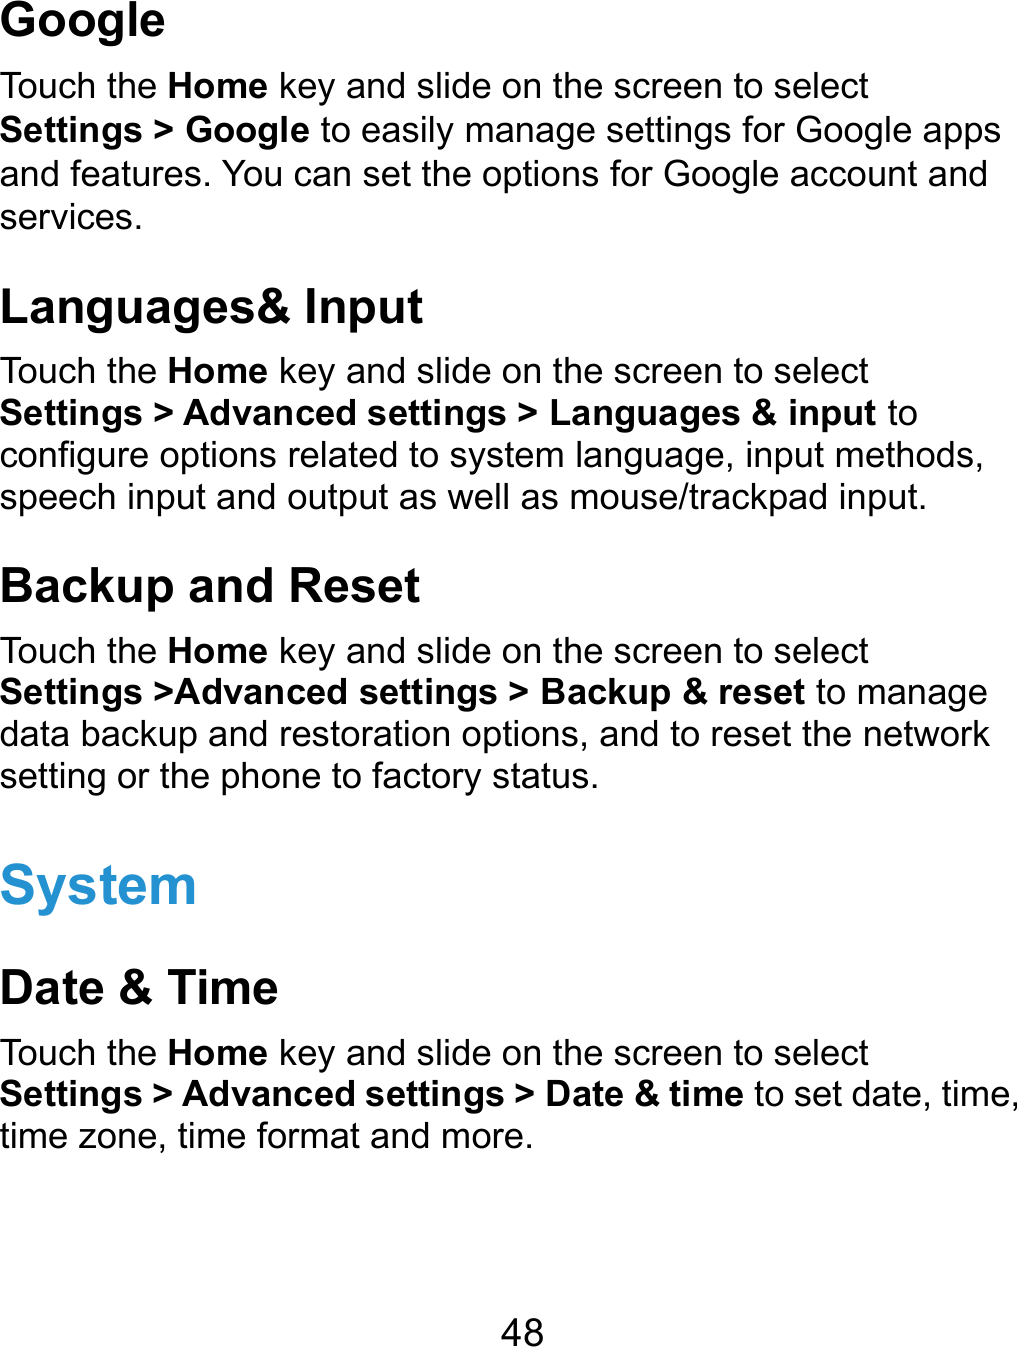  48 Google Touch the Home key and slide on the screen to select Settings &gt; Google to easily manage settings for Google apps and features. You can set the options for Google account and services. Languages&amp; Input Touch the Home key and slide on the screen to select Settings &gt; Advanced settings &gt; Languages &amp; input to configure options related to system language, input methods, speech input and output as well as mouse/trackpad input. Backup and Reset Touch the Home key and slide on the screen to select Settings &gt;Advanced settings &gt; Backup &amp; reset to manage data backup and restoration options, and to reset the network setting or the phone to factory status. System Date &amp; Time Touch the Home key and slide on the screen to select Settings &gt; Advanced settings &gt; Date &amp; time to set date, time, time zone, time format and more. 